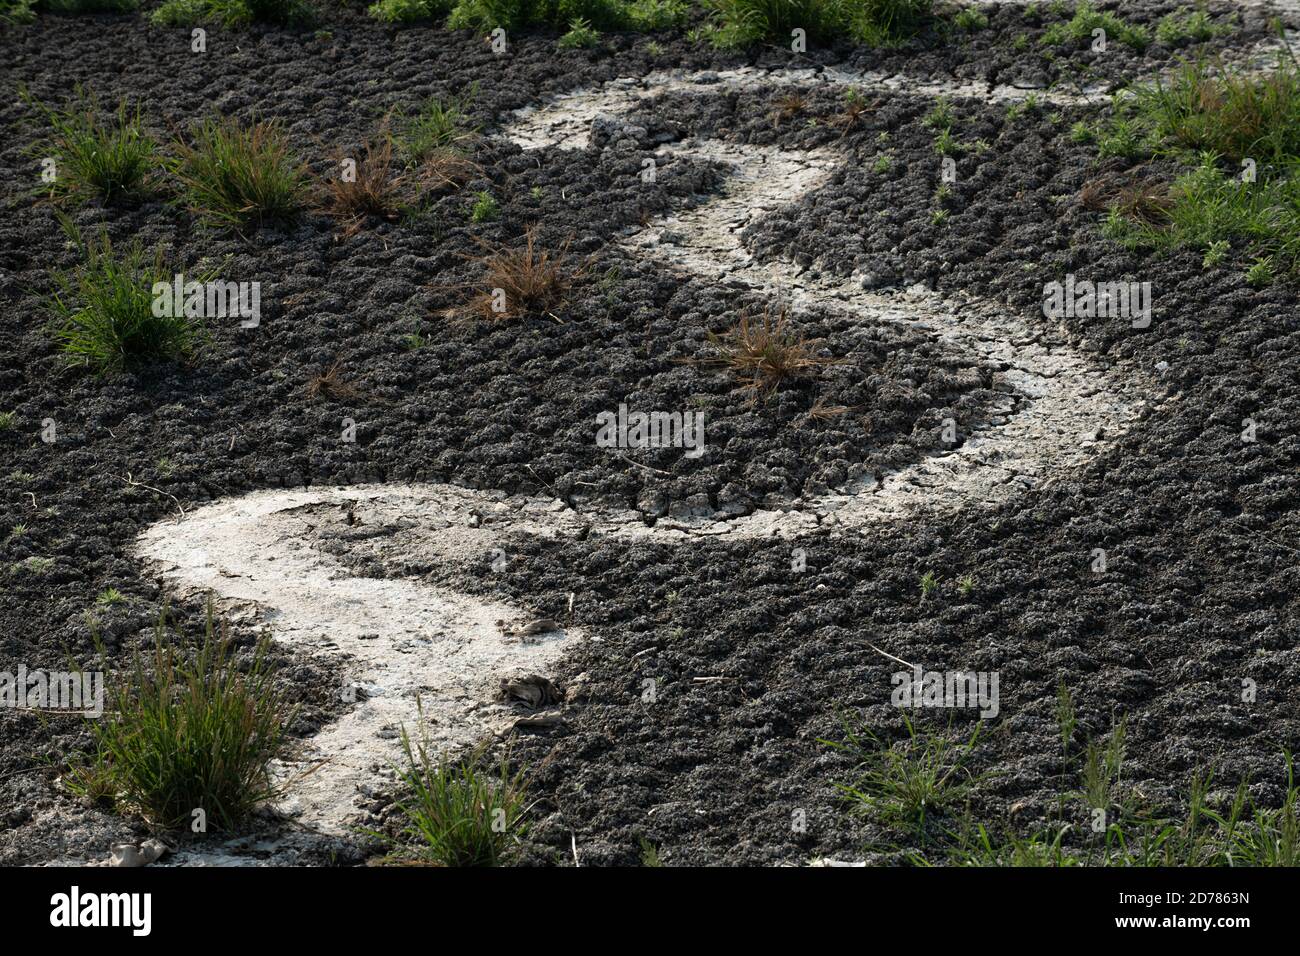 Drought - a Dry riverbed Stock Photo